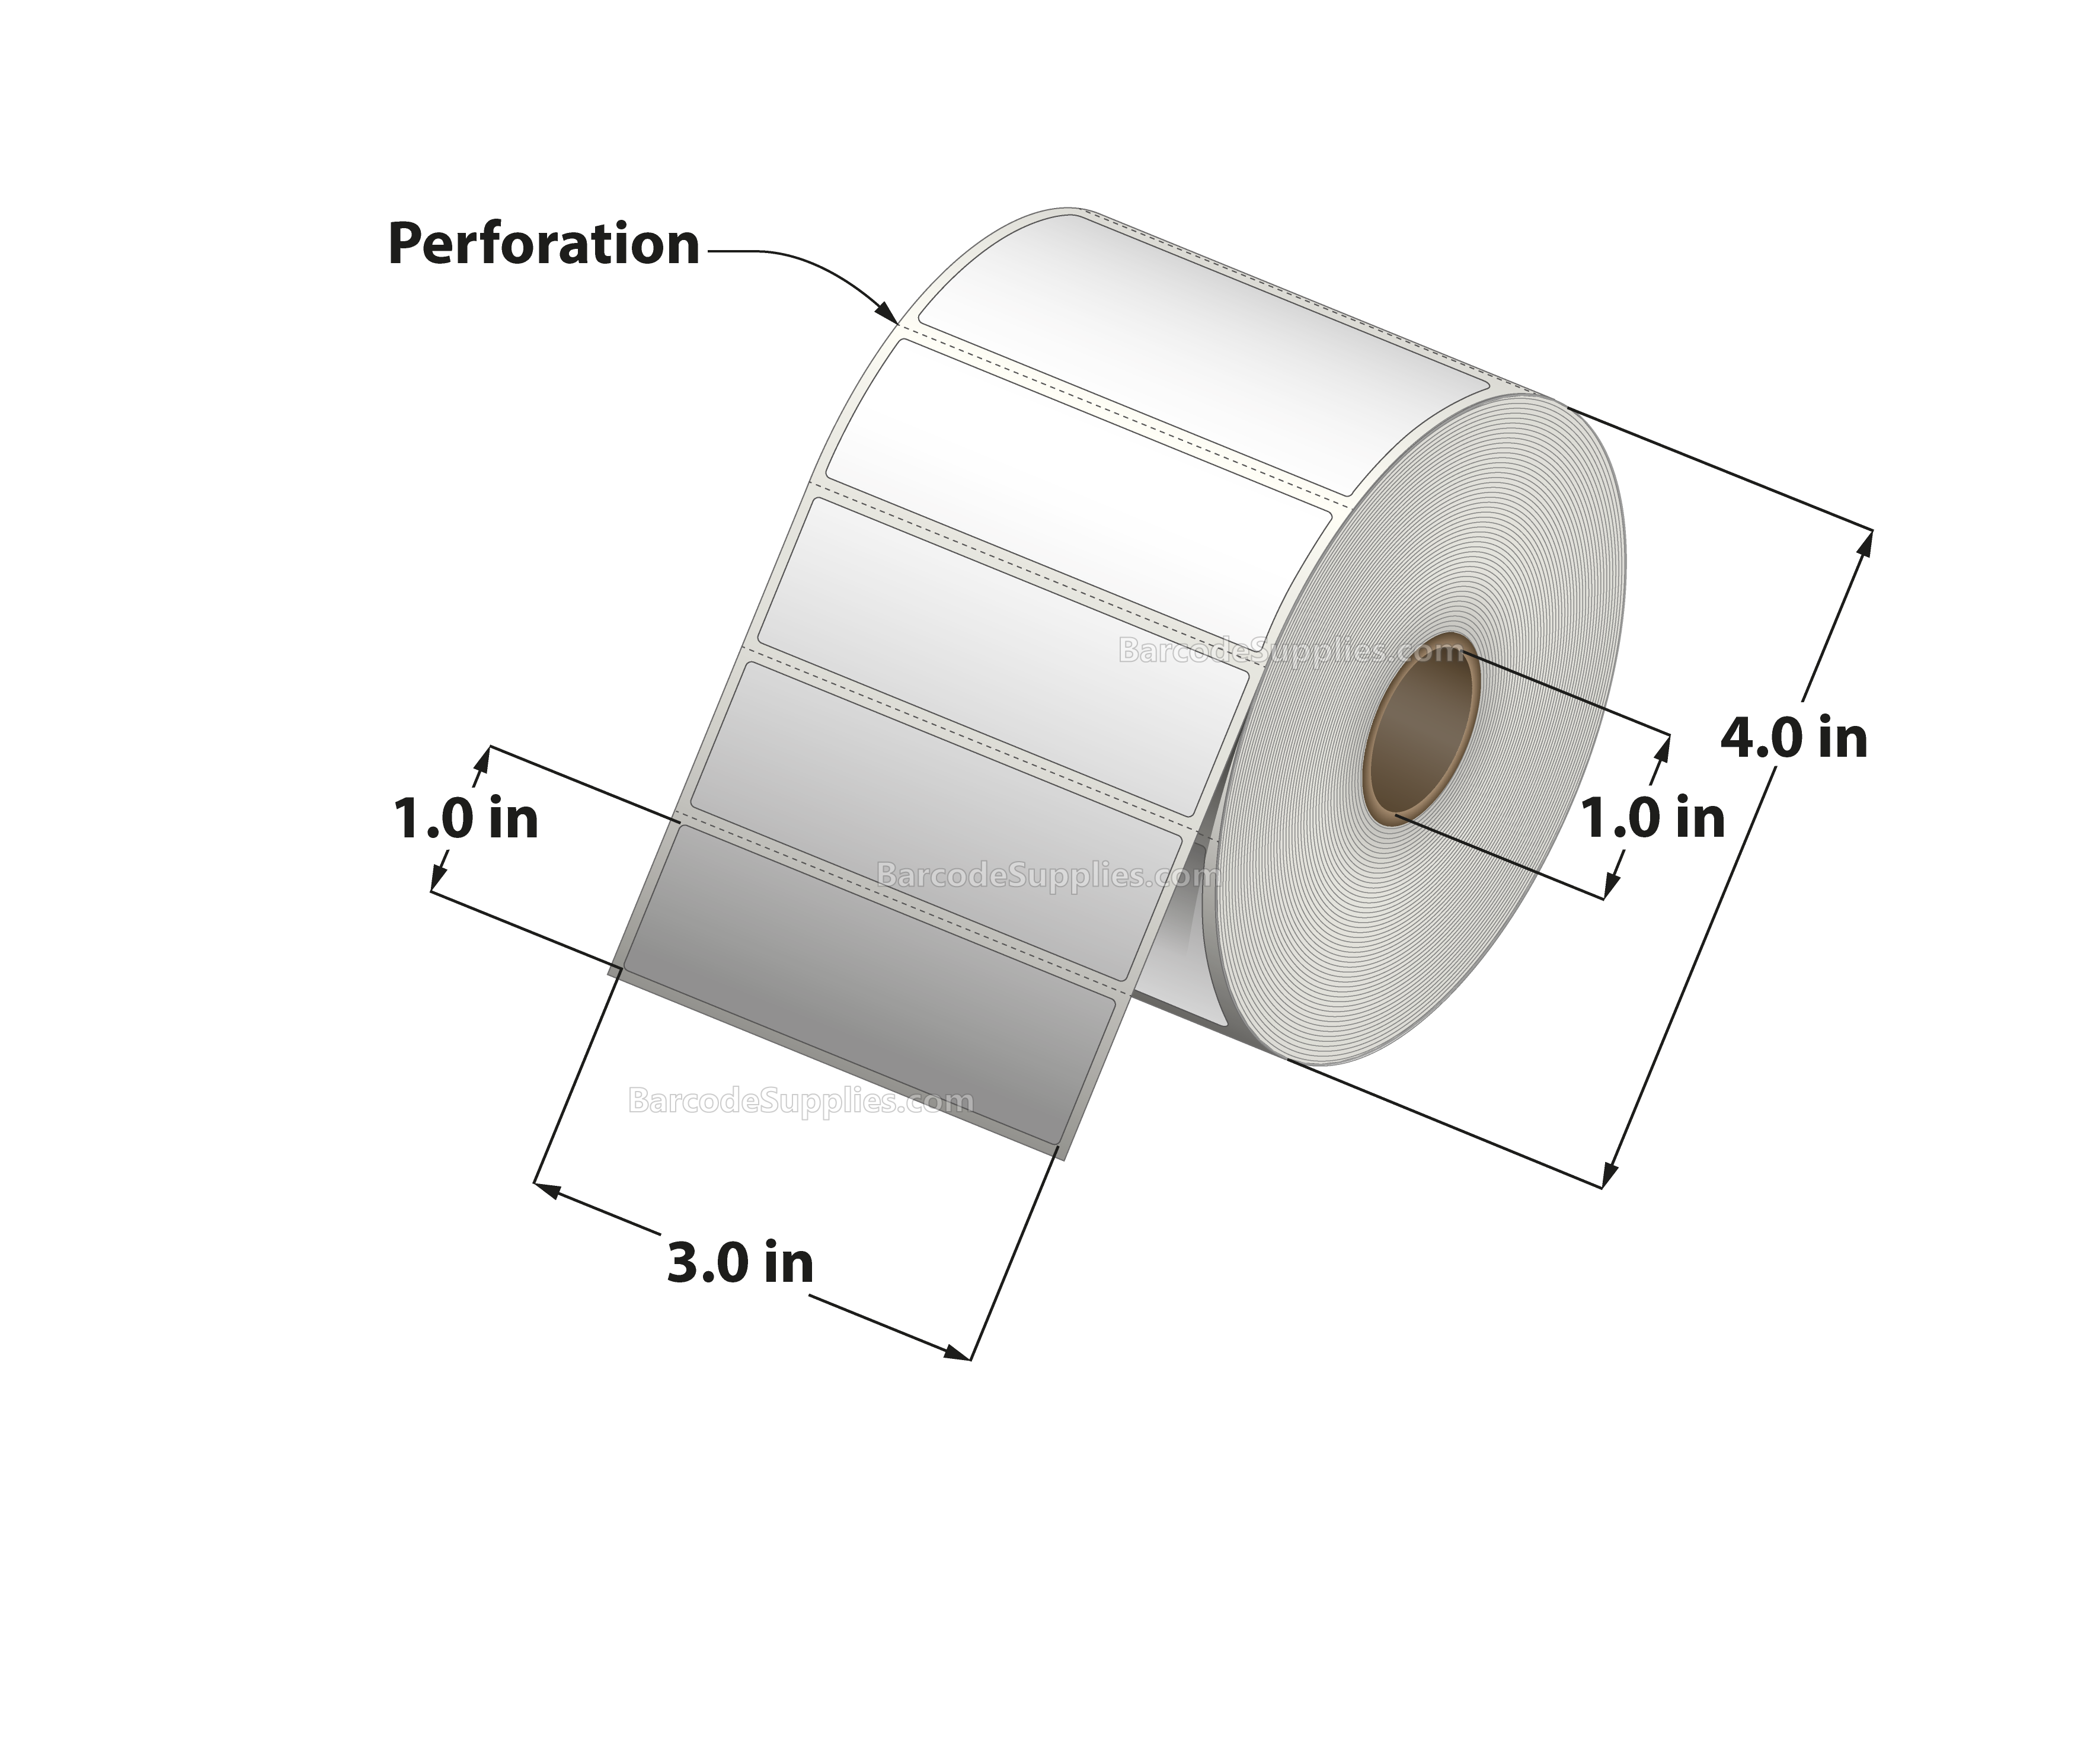 3 x 1 Direct Thermal White Labels With Acrylic Adhesive - Perforated - 1375 Labels Per Roll - Carton Of 12 Rolls - 16500 Labels Total - MPN: RD-3-1-1375-1 - BarcodeSource, Inc.